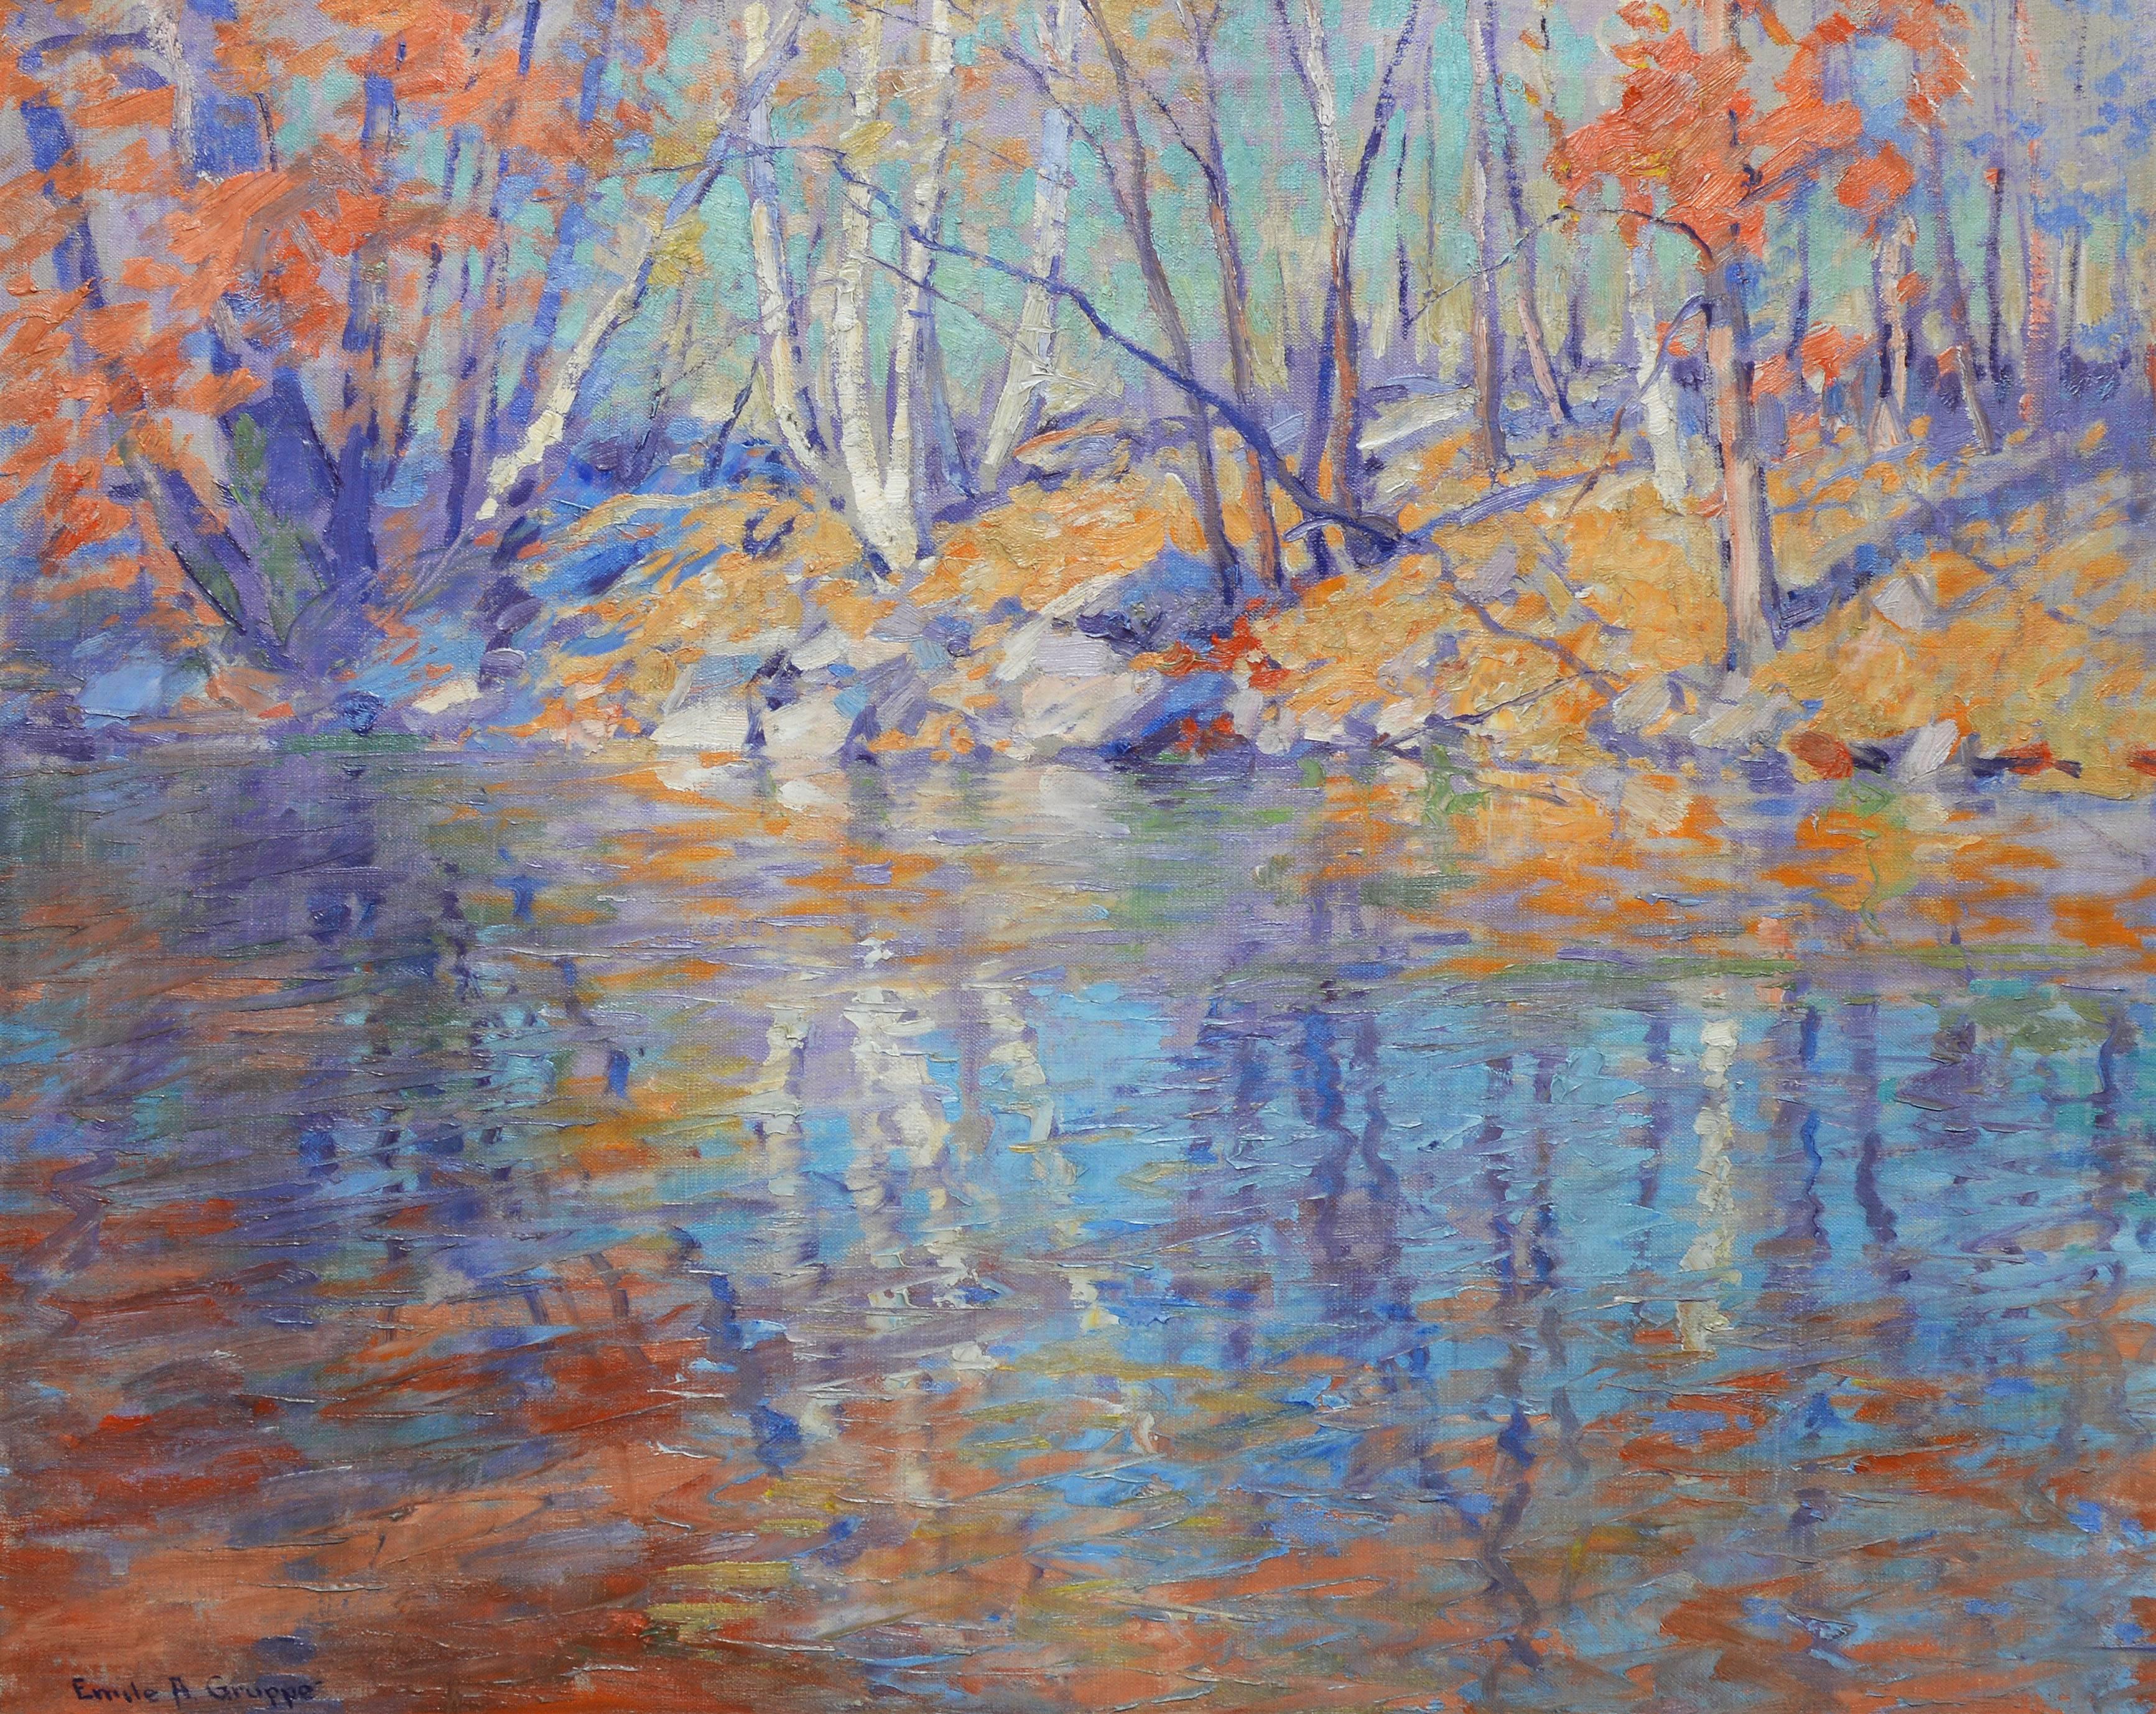 Fall Reflections - American Impressionist Painting by Emile Albert Gruppe